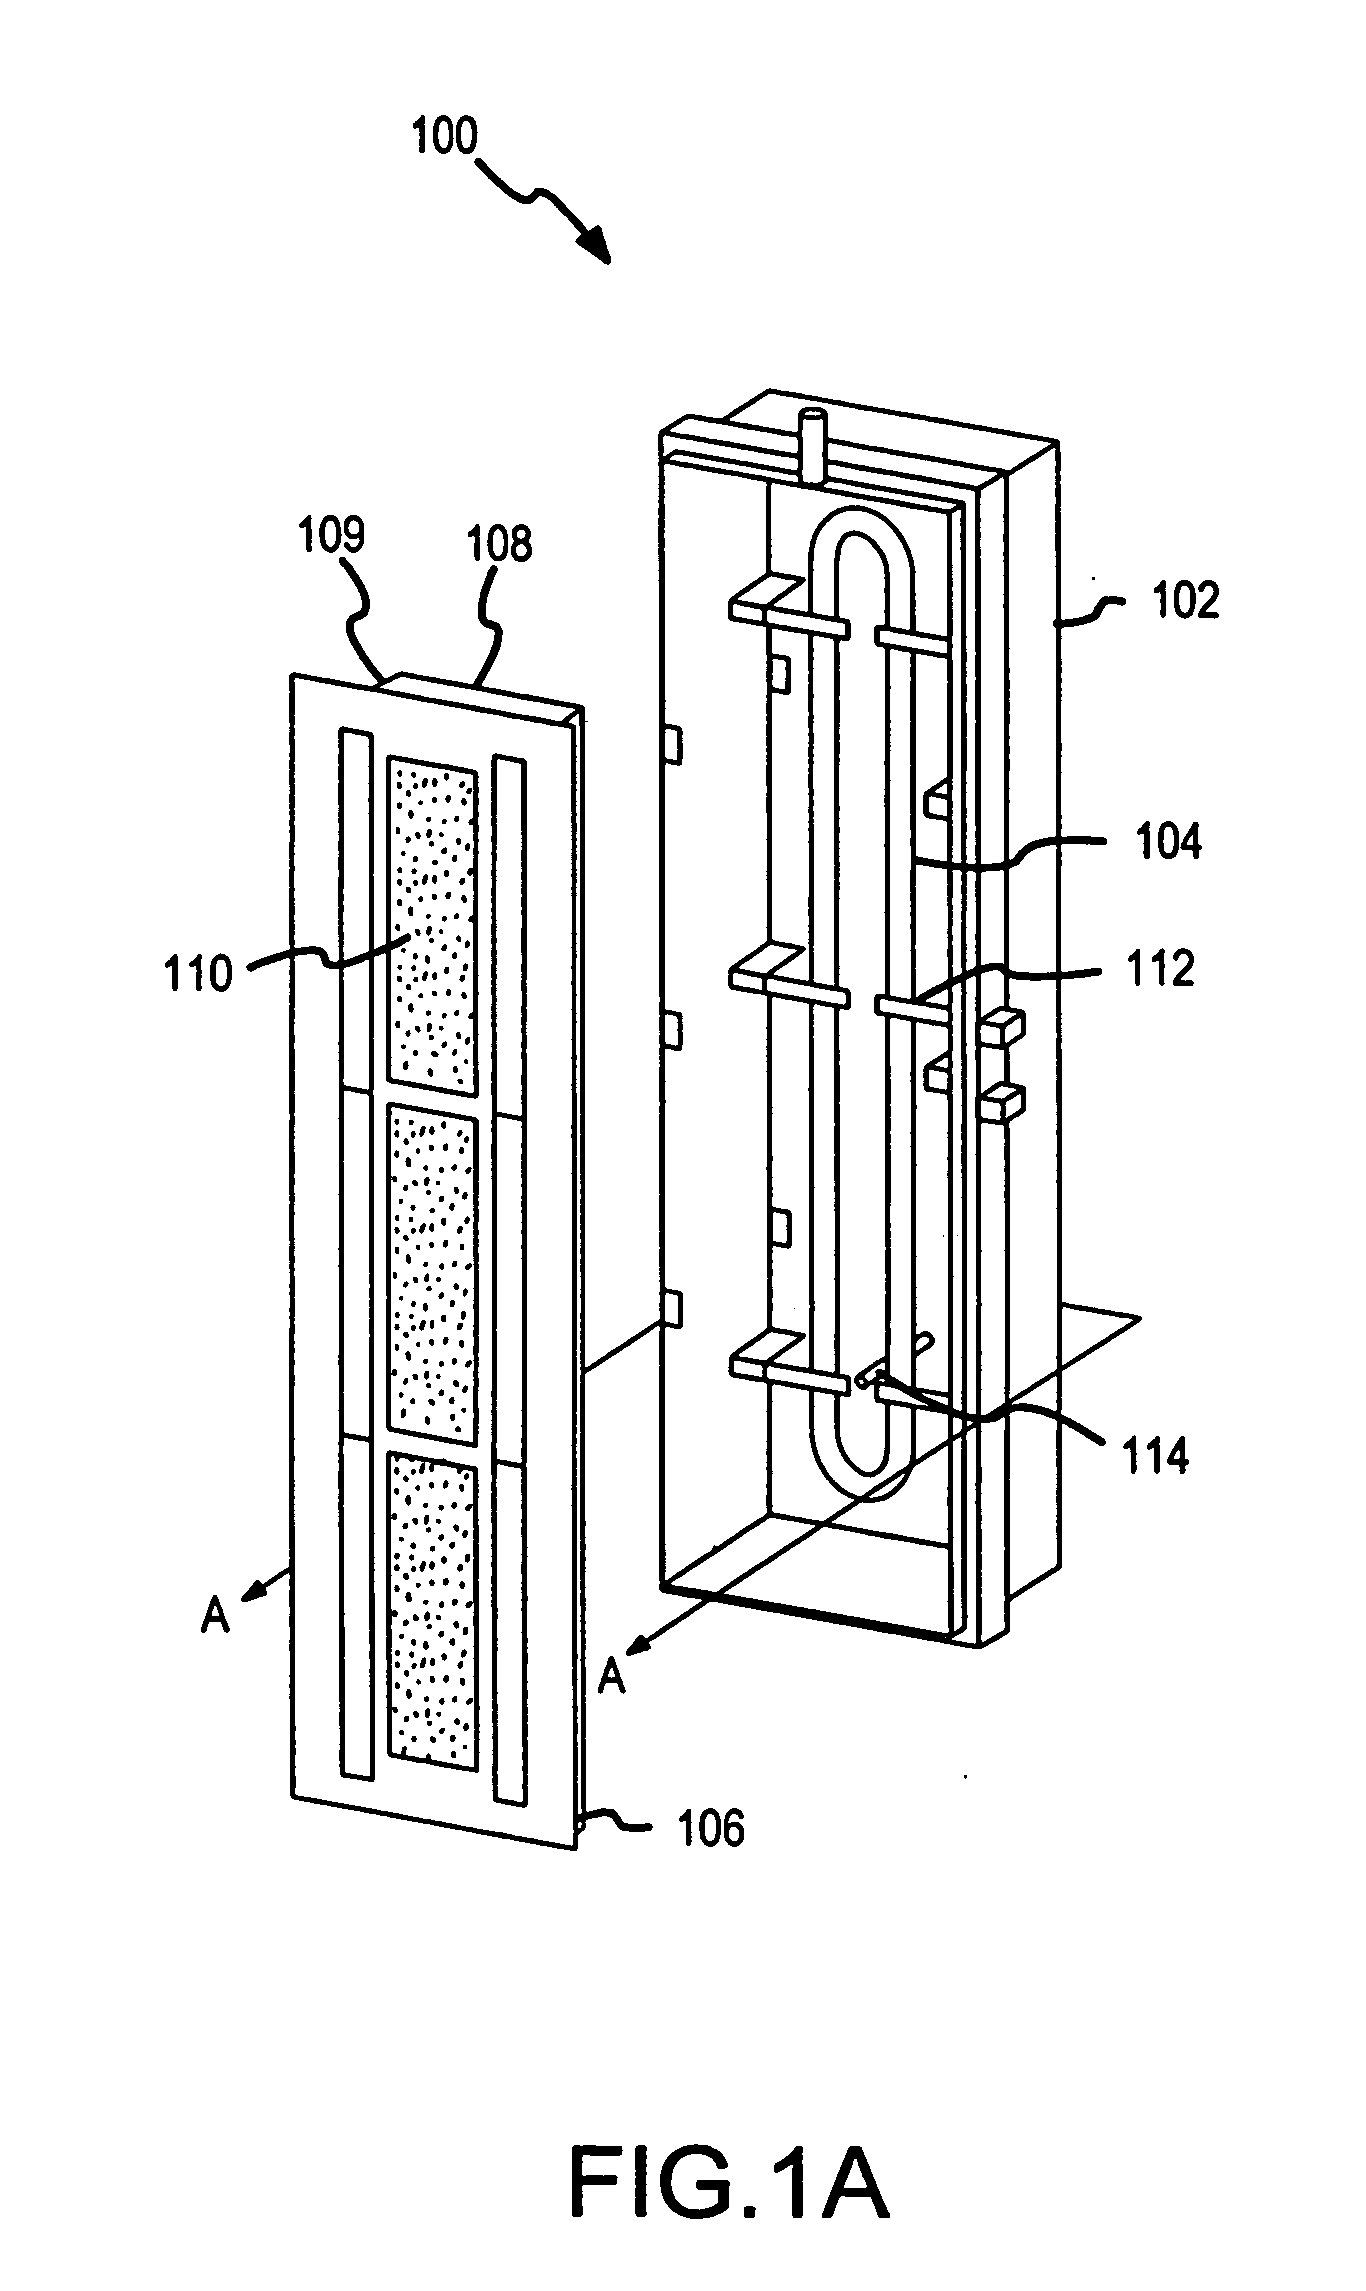 Multi-grid ion beam source for generating a highly collimated ion beam